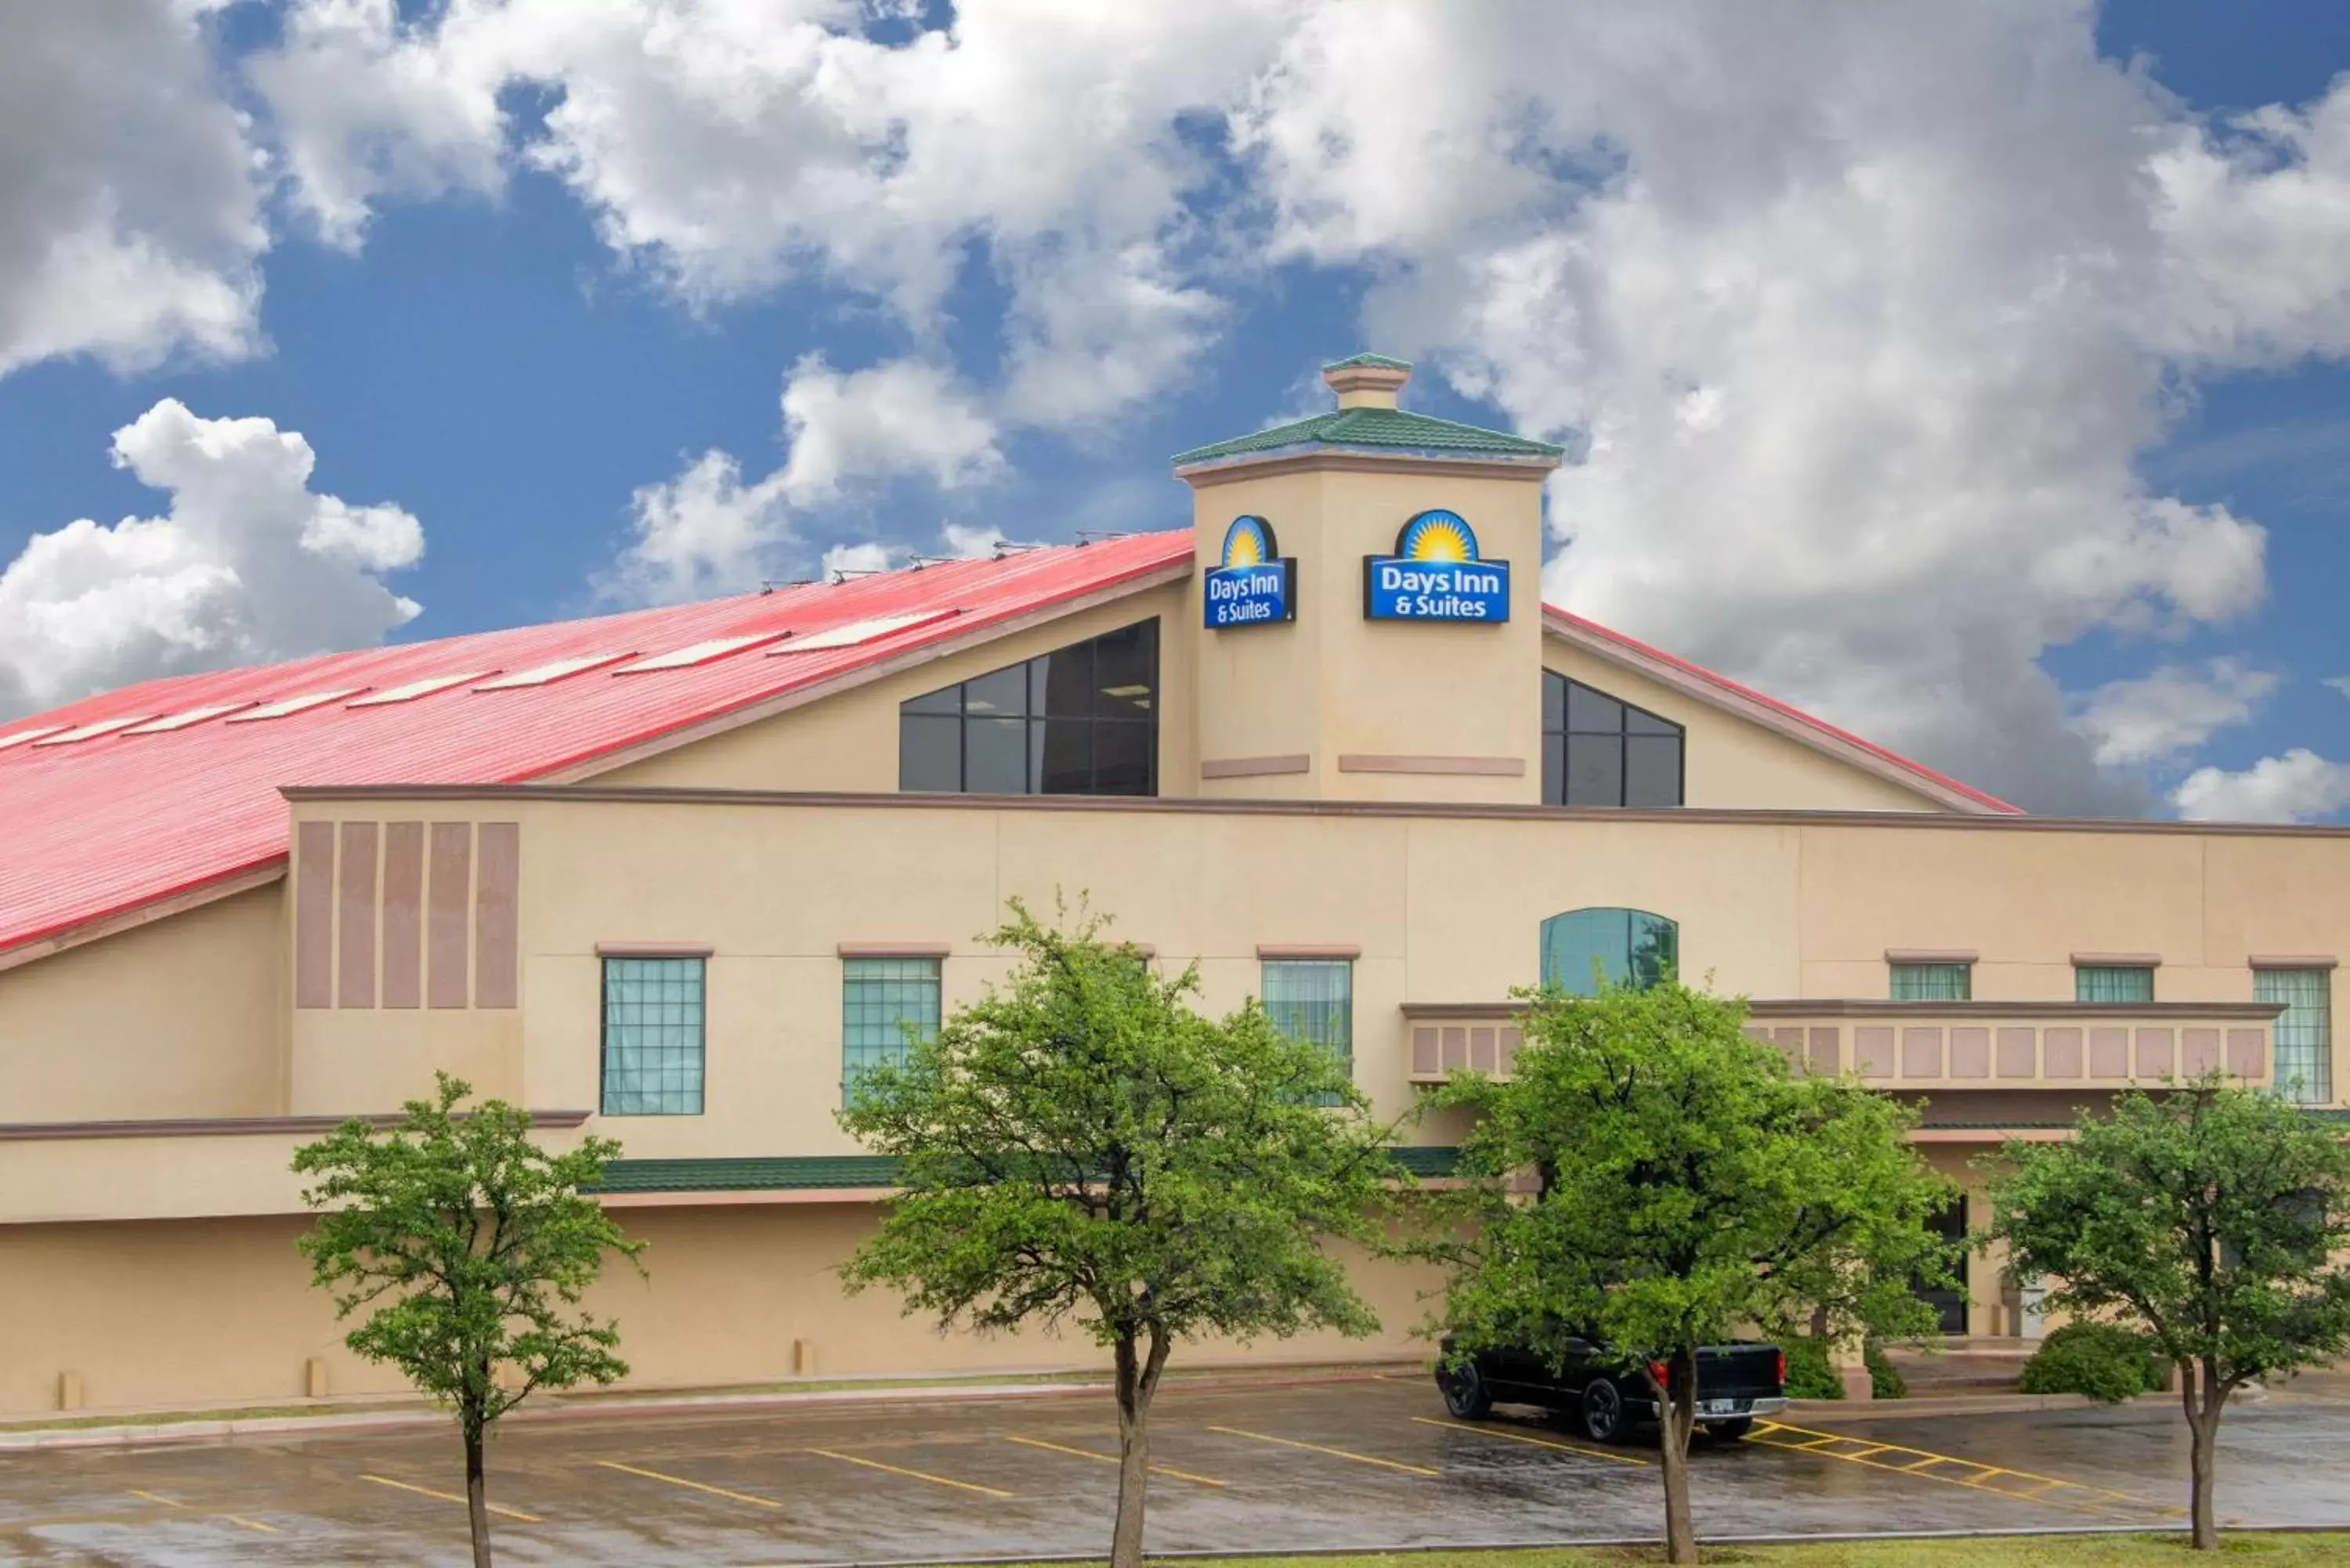 Property Building in Days Inn by Wyndham Lubbock South